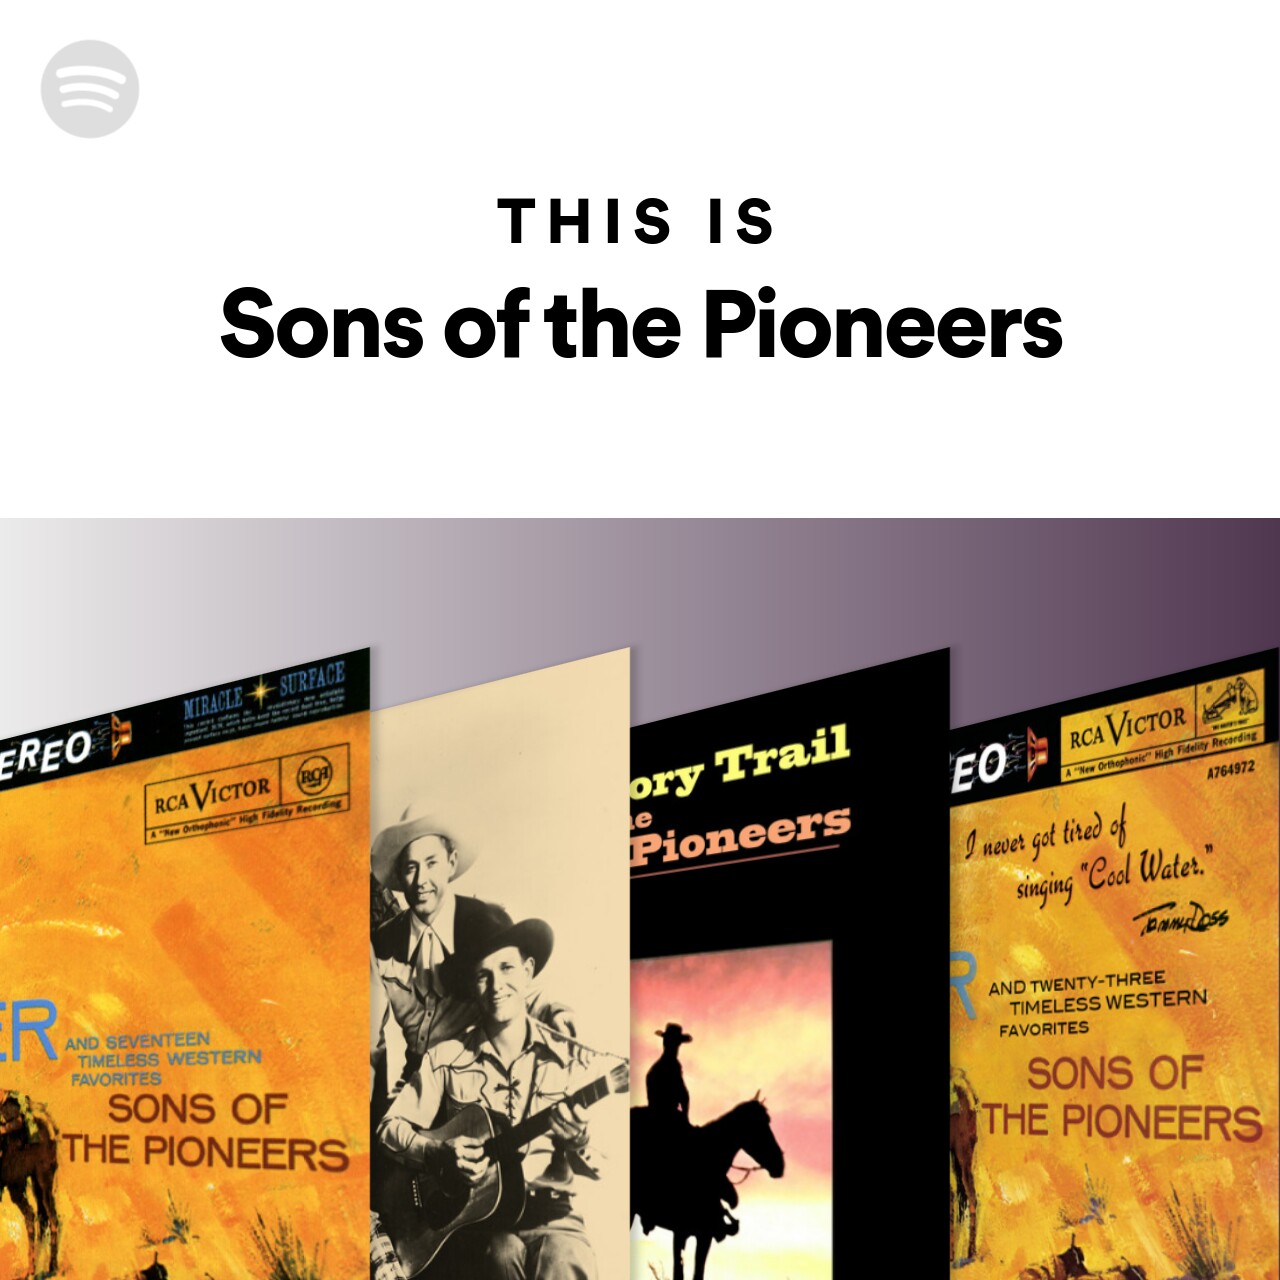 This Is Sons of the Pioneers